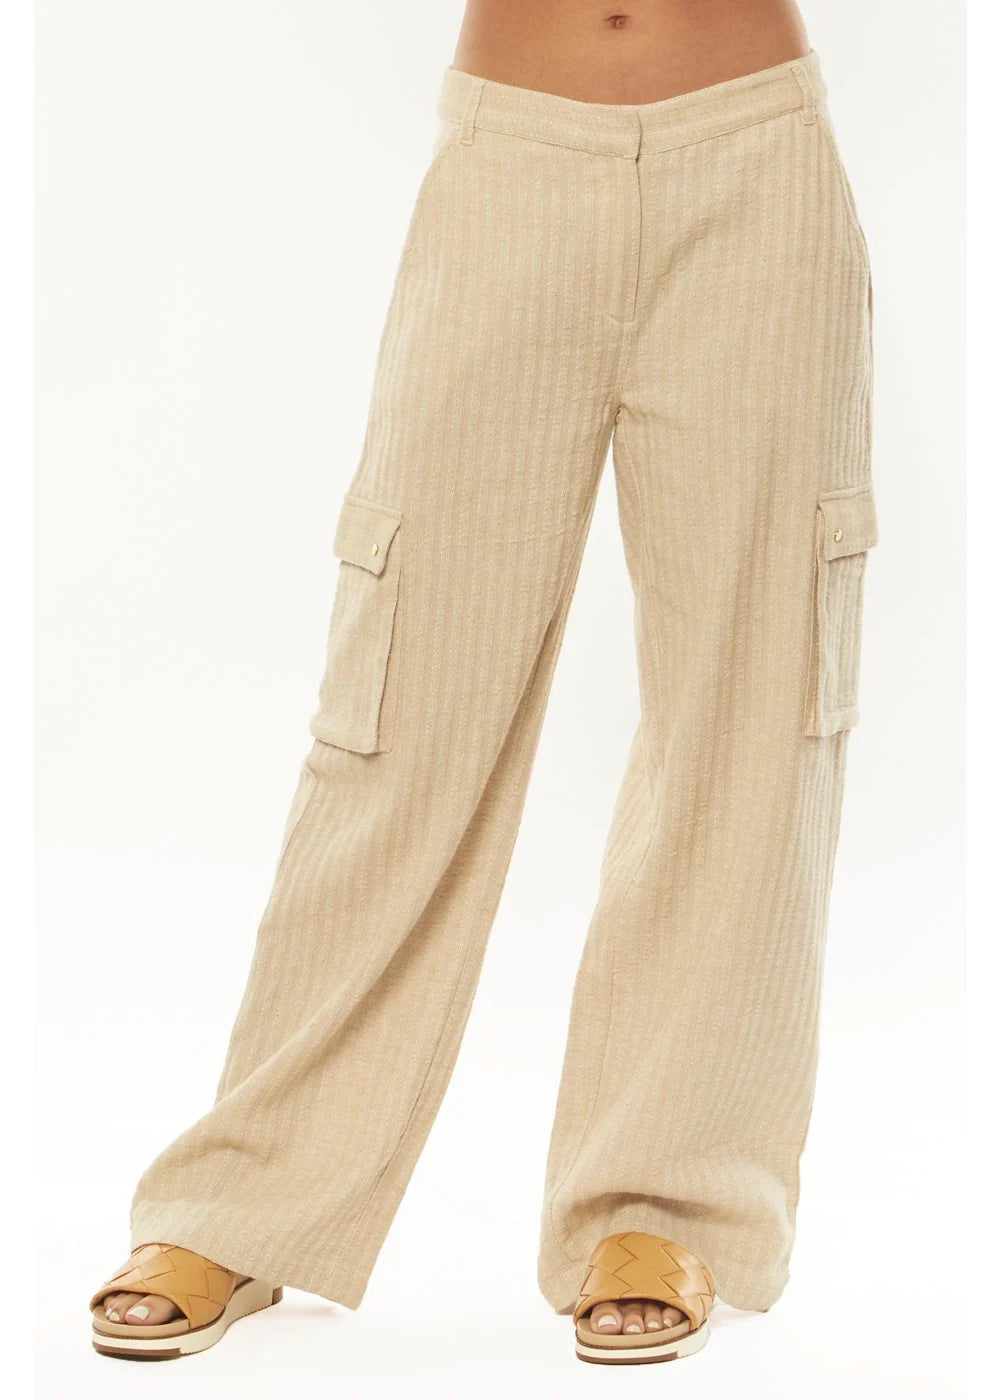 In Harmony Woven Pant